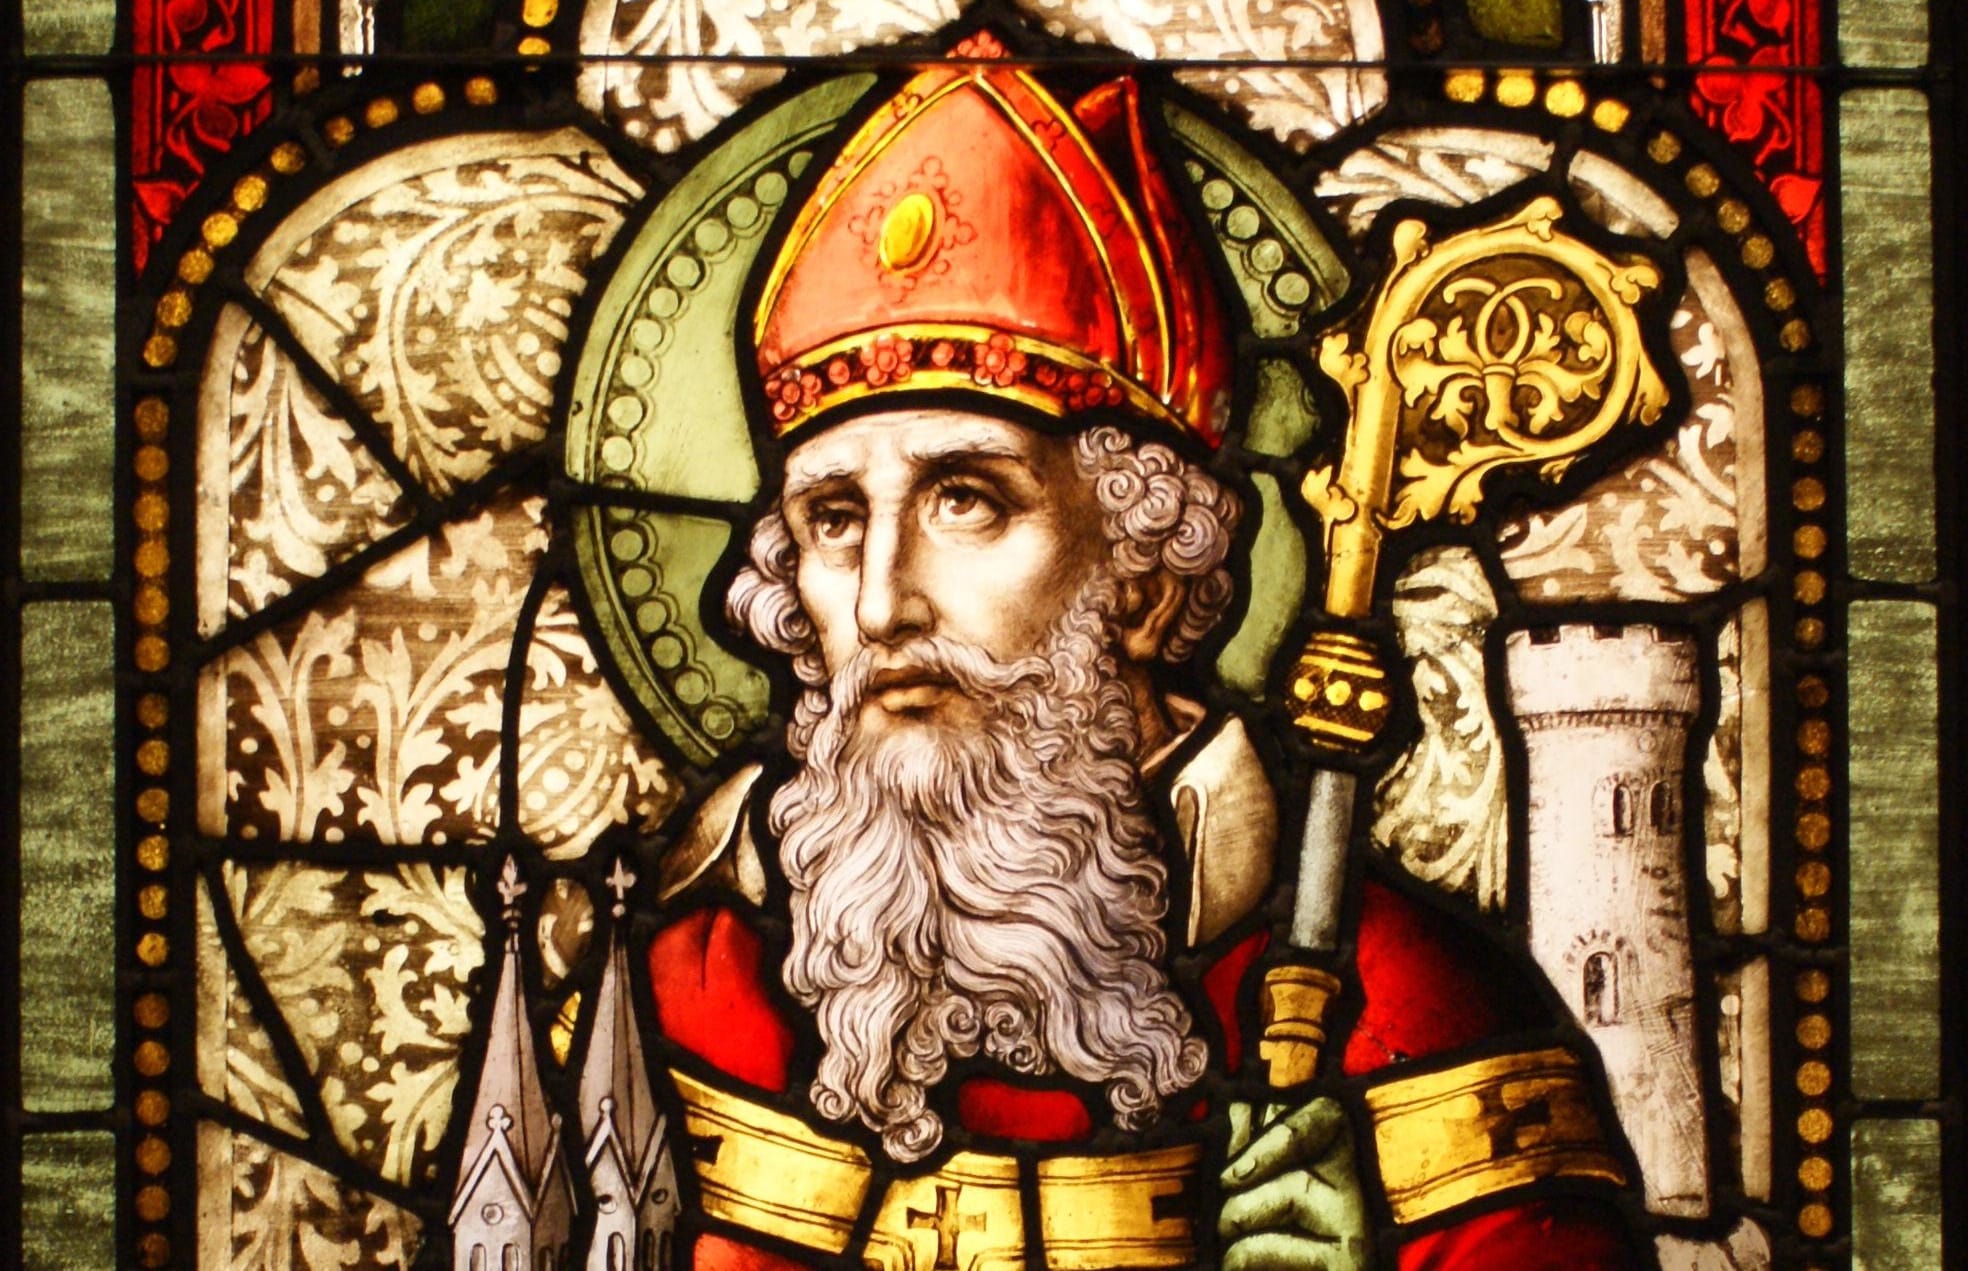 Saint Patrick stained glass window from Cathedral of Christ the Light, Oakland, CA.